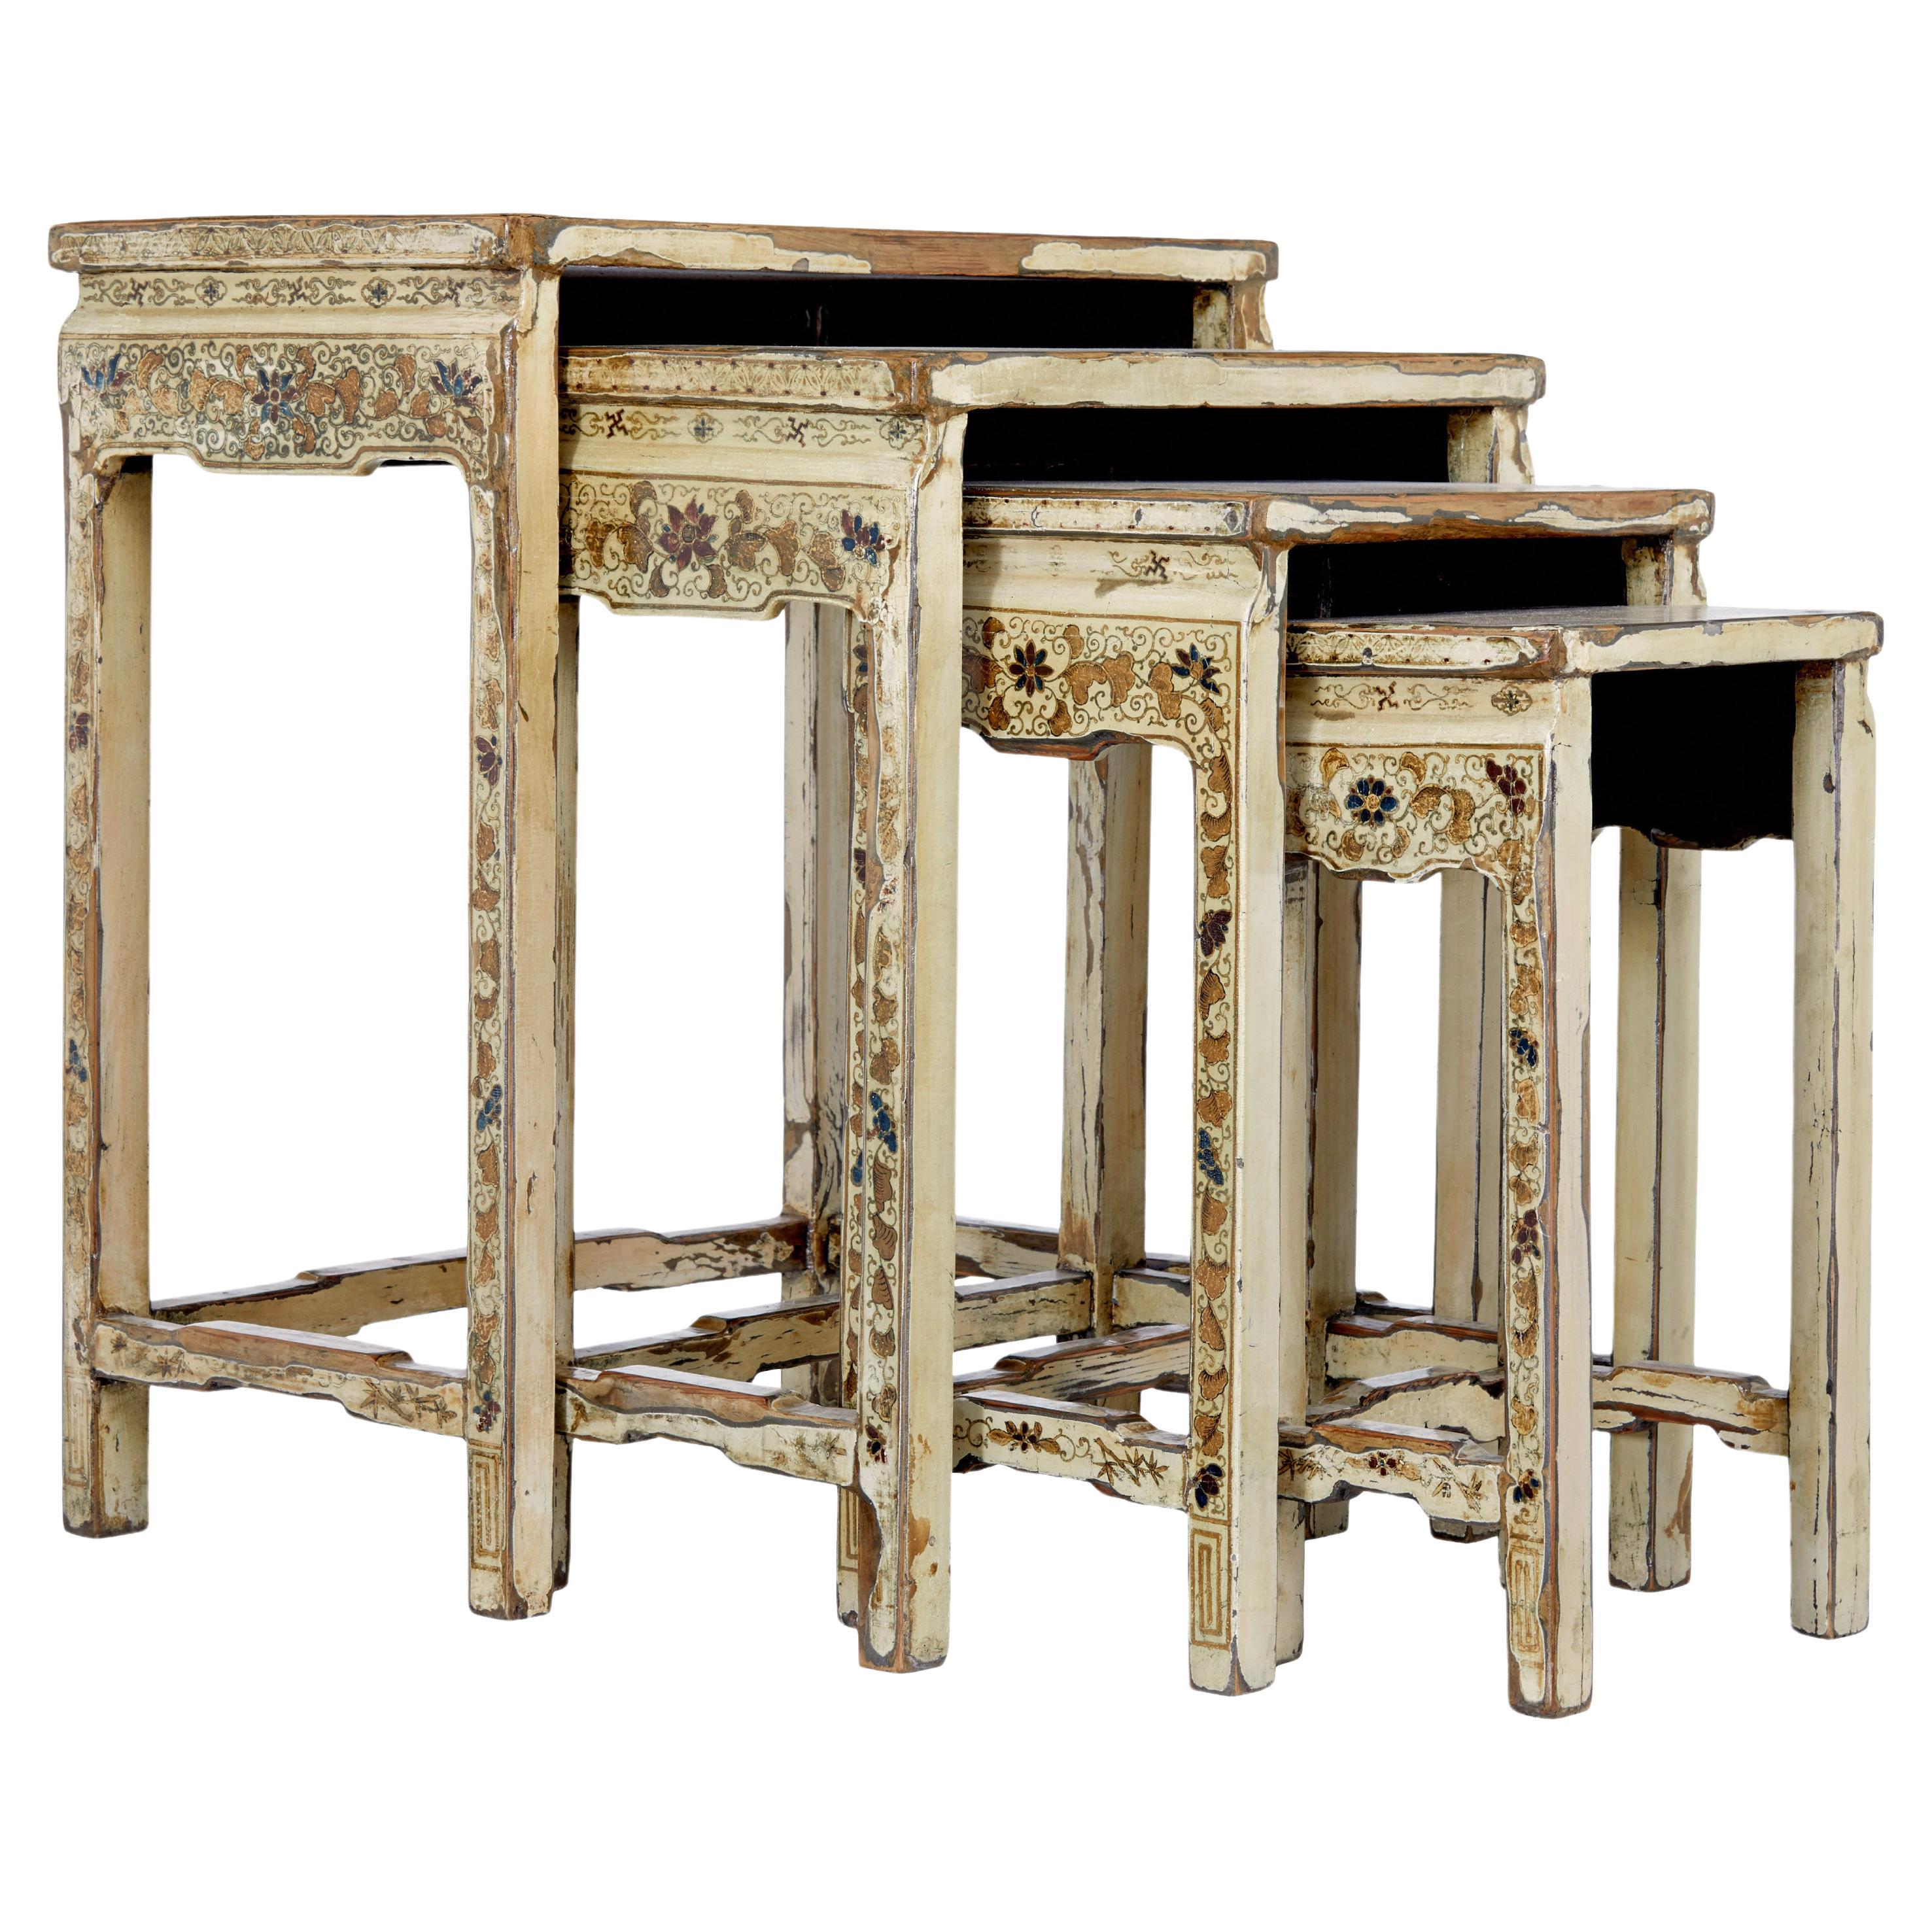 Early 20th century nest of 4 lacquered and decorated tables For Sale